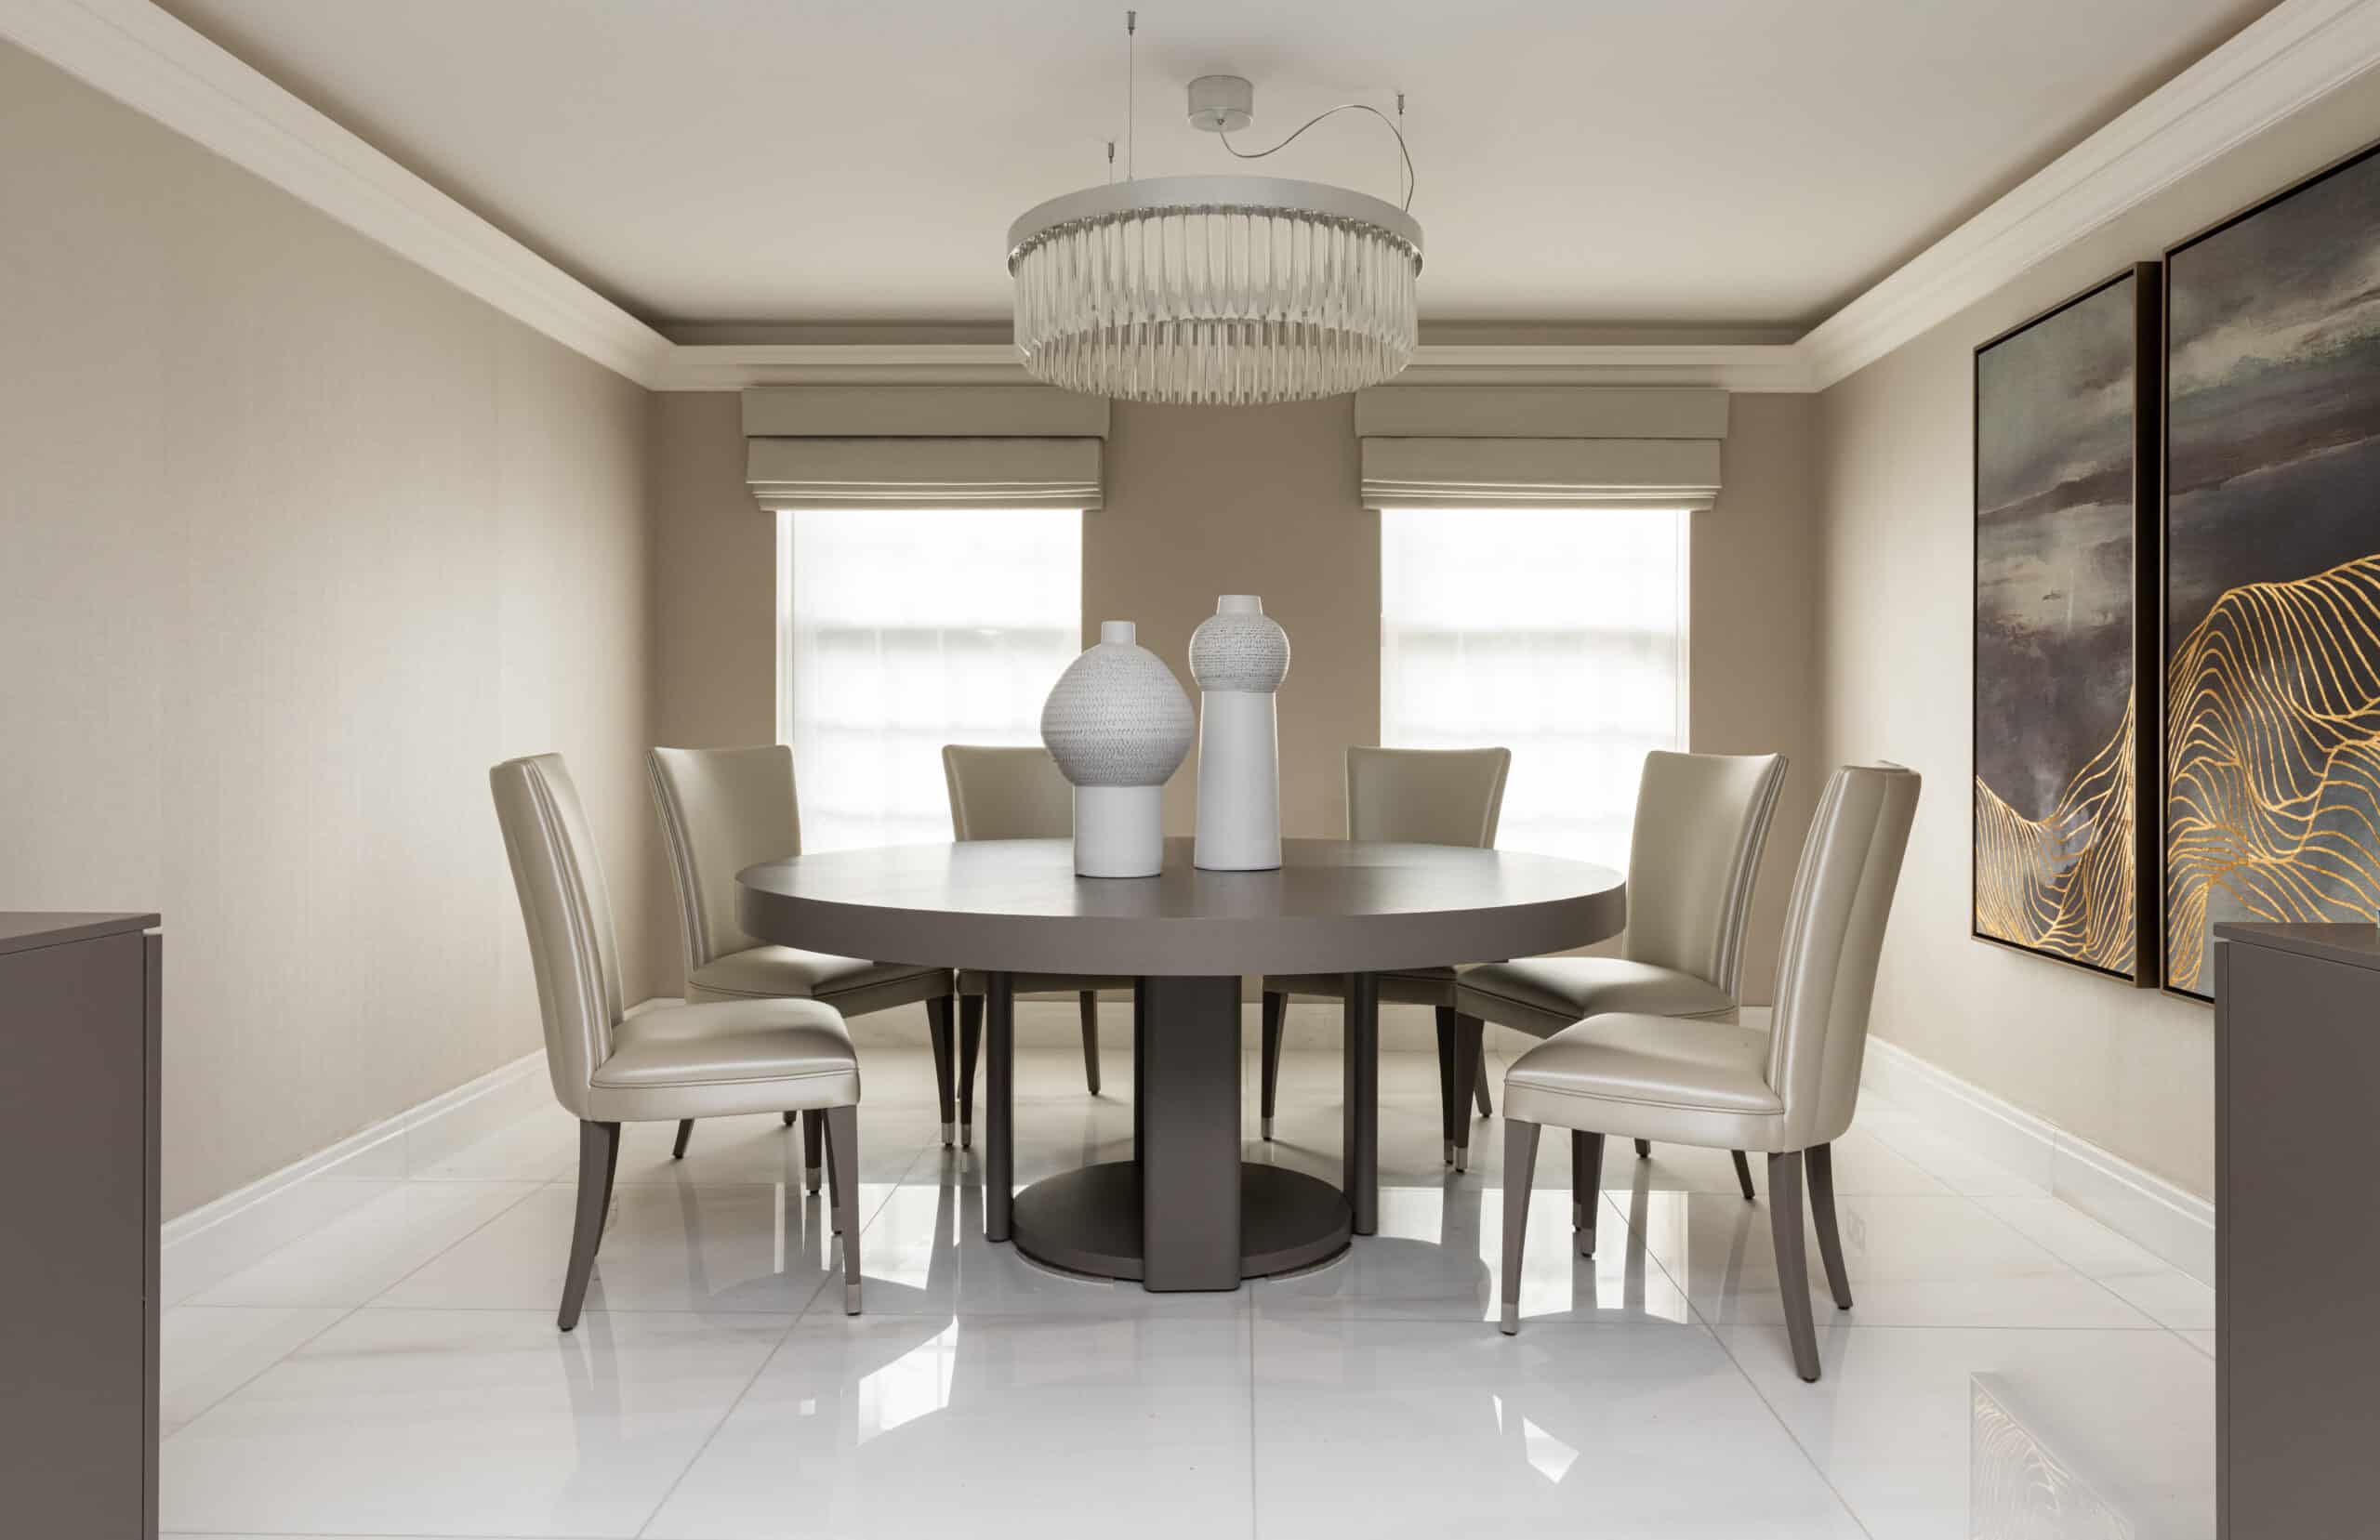 Our Interior Designer in Chelmsford Selected a Circular Hardwood Table for a Dining Room